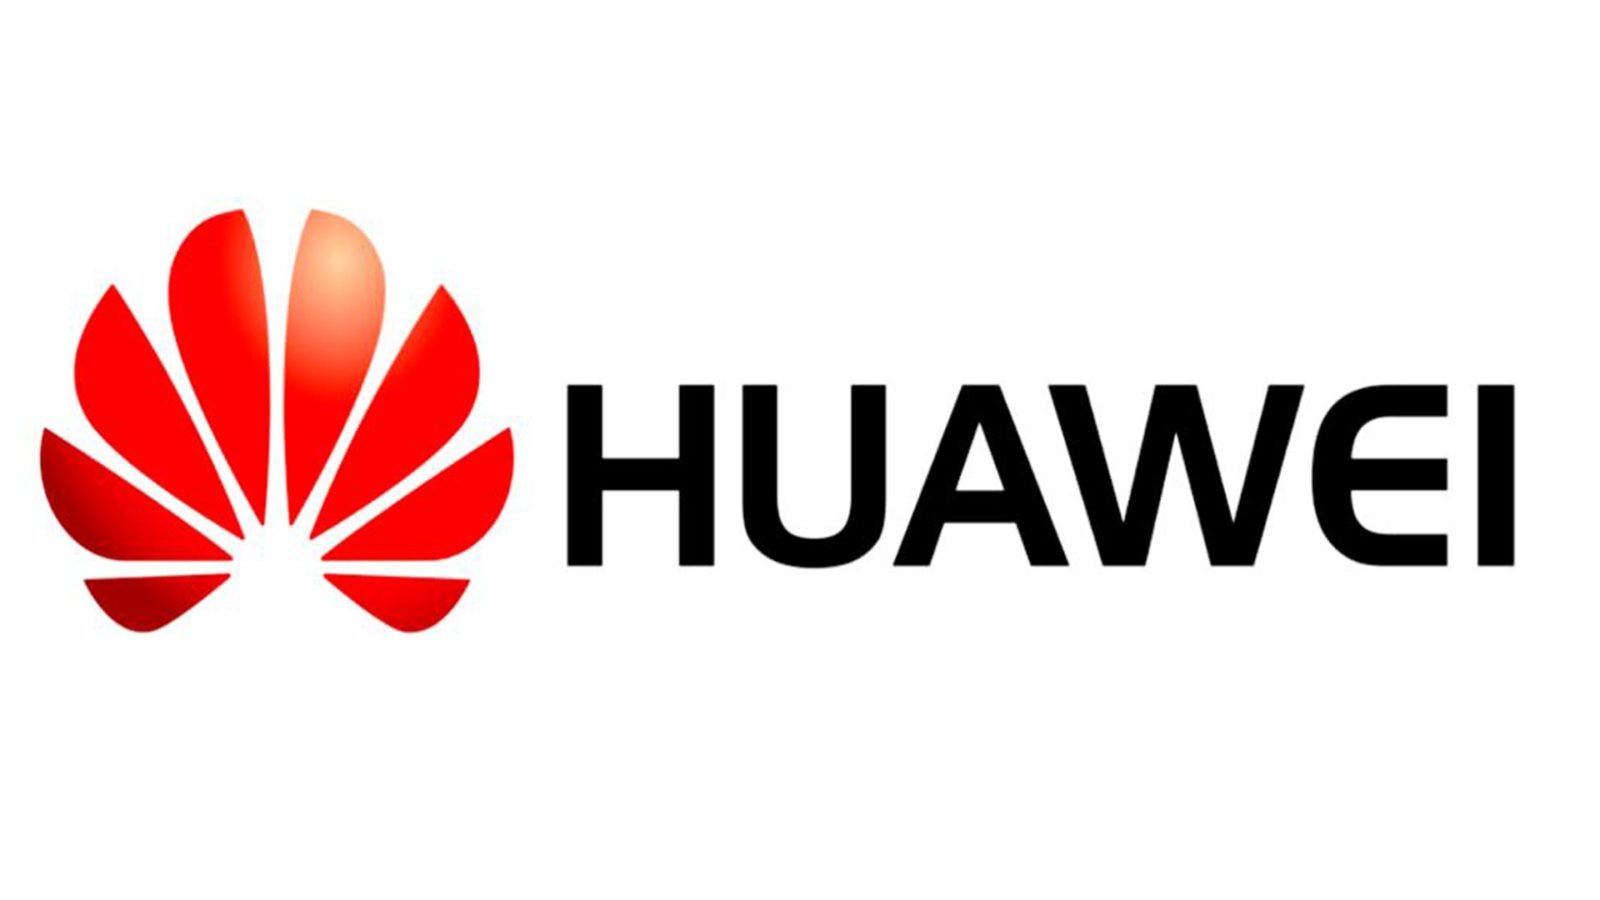 Huawei Pakistan & GIK Sign Agreement for BS in AI Partnered by Huawei